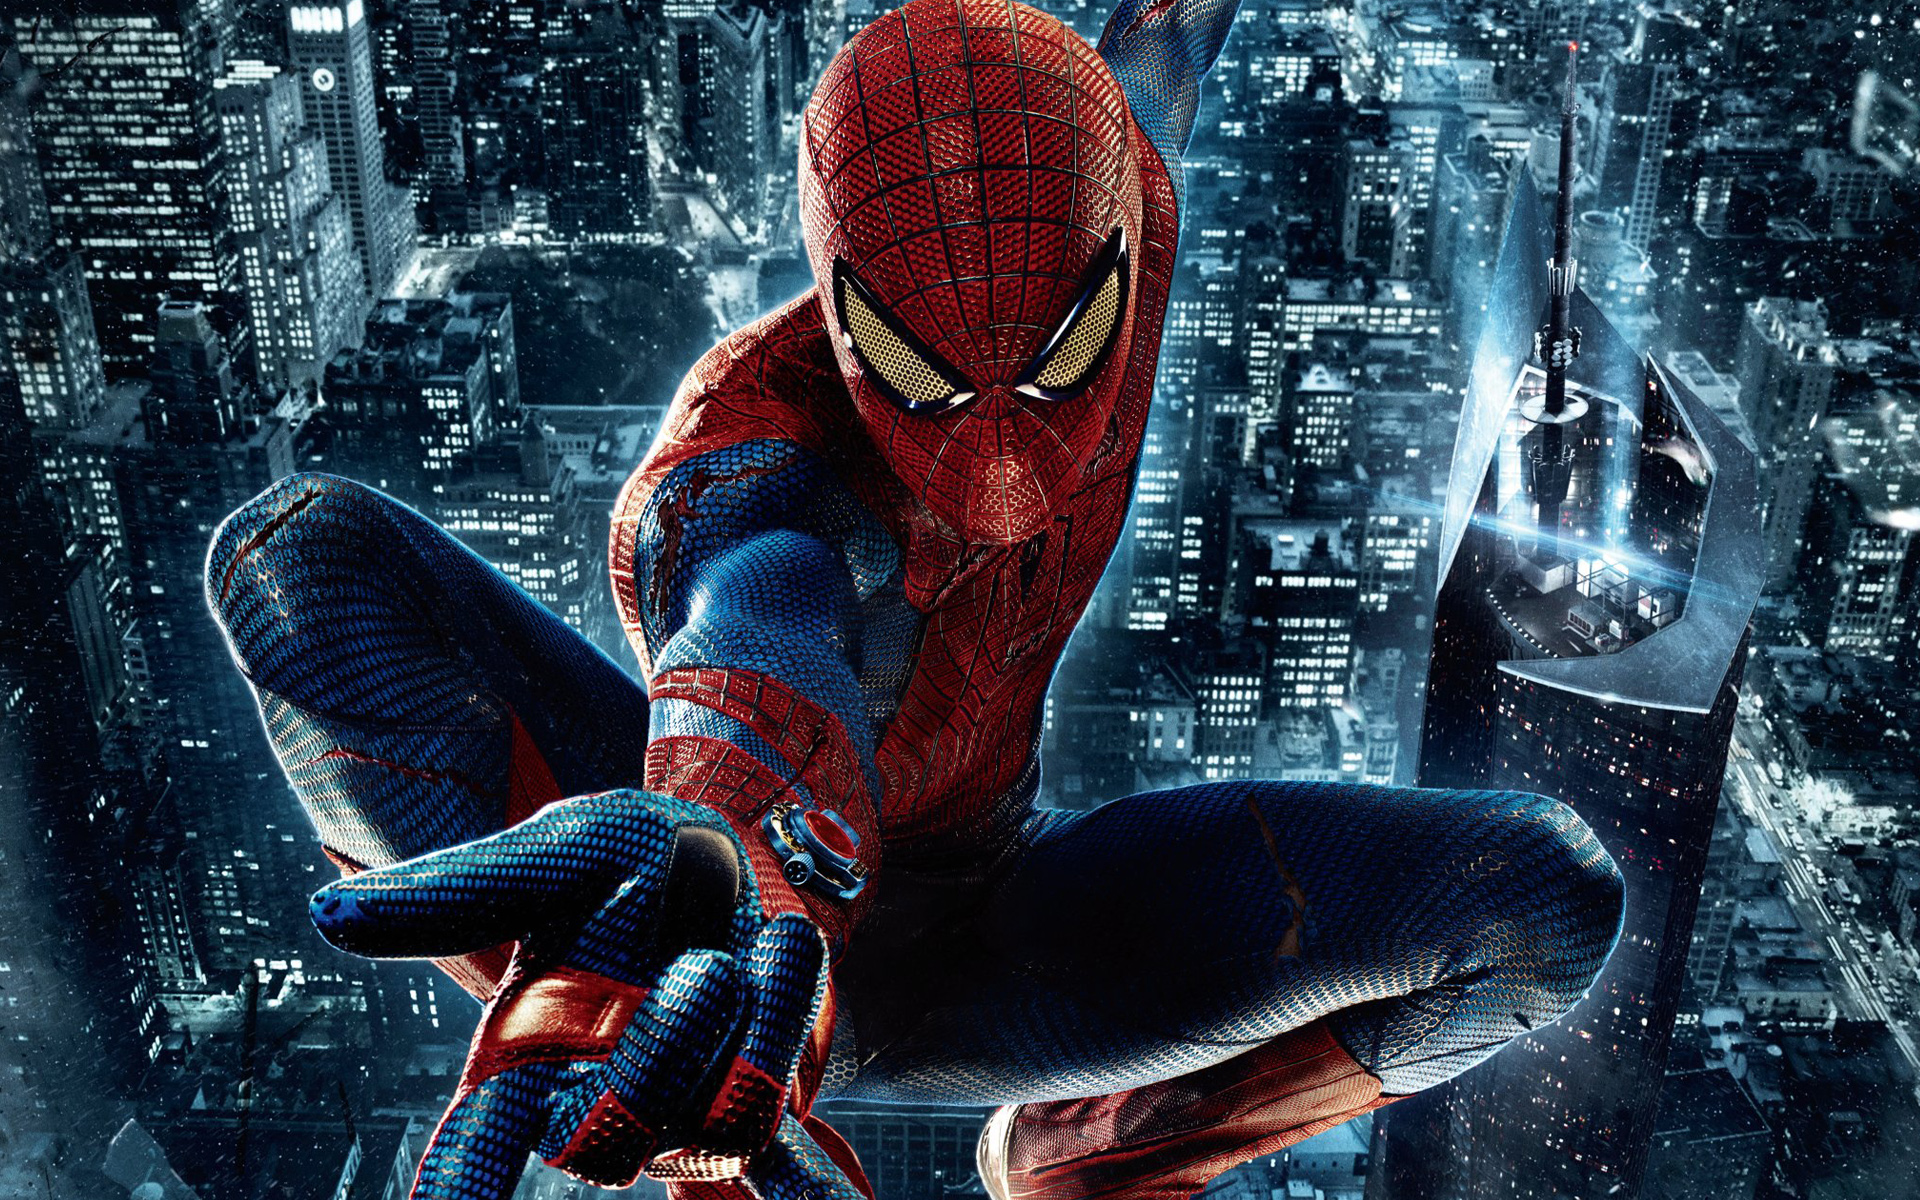 Video Review: The Amazing Spider-Man 2